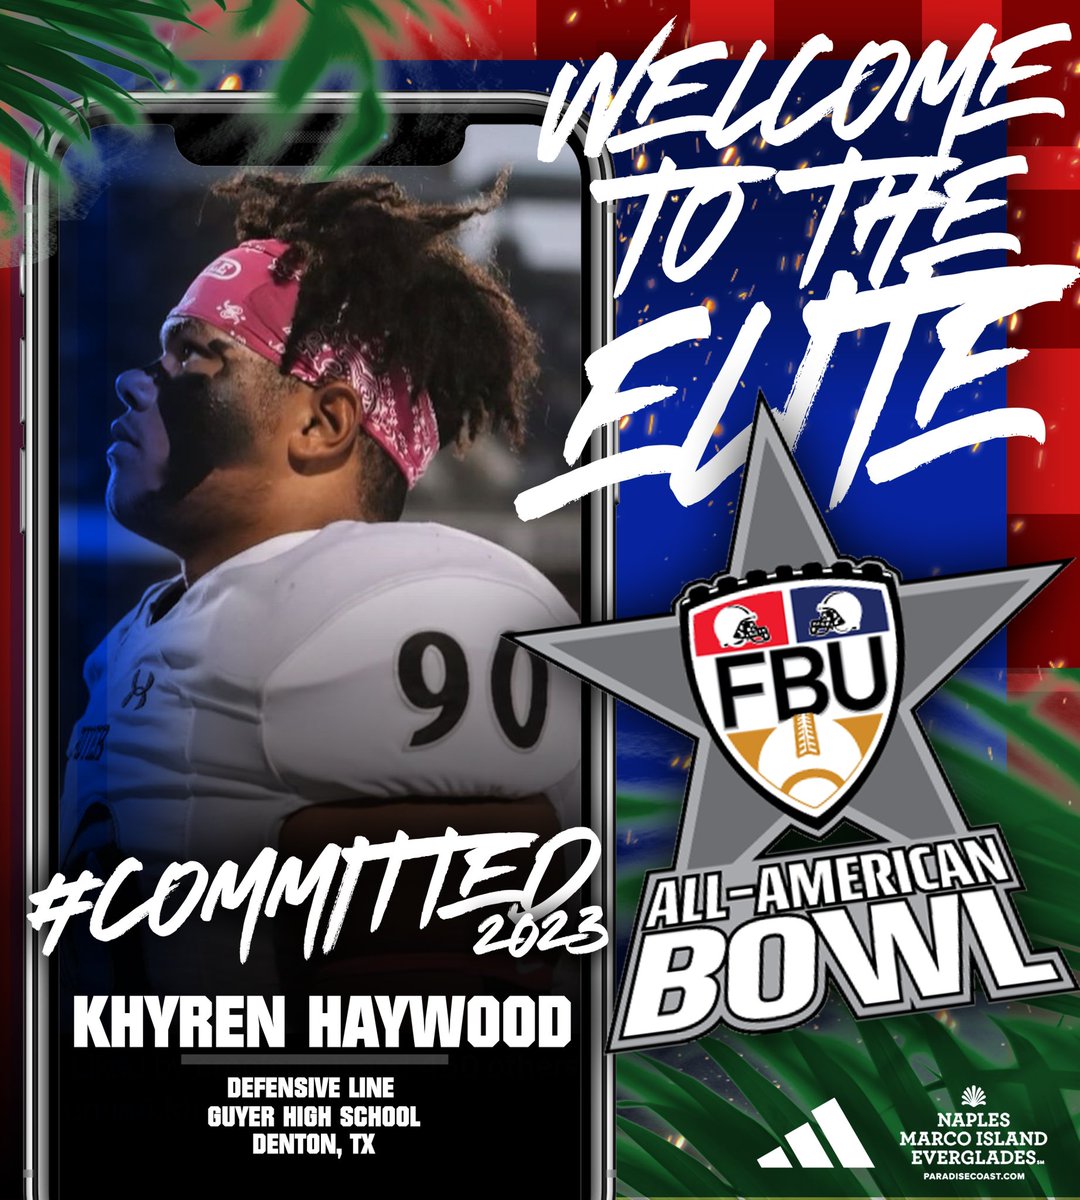 WELCOME TO THE ELITE 🌴 #FBUPathAlum Khyren Haywood punched his ticket to the #FBUAllAmerican Bowl 2023 👀 See you in Naples, FL this December 🔥 #FBU #GetBetterHere